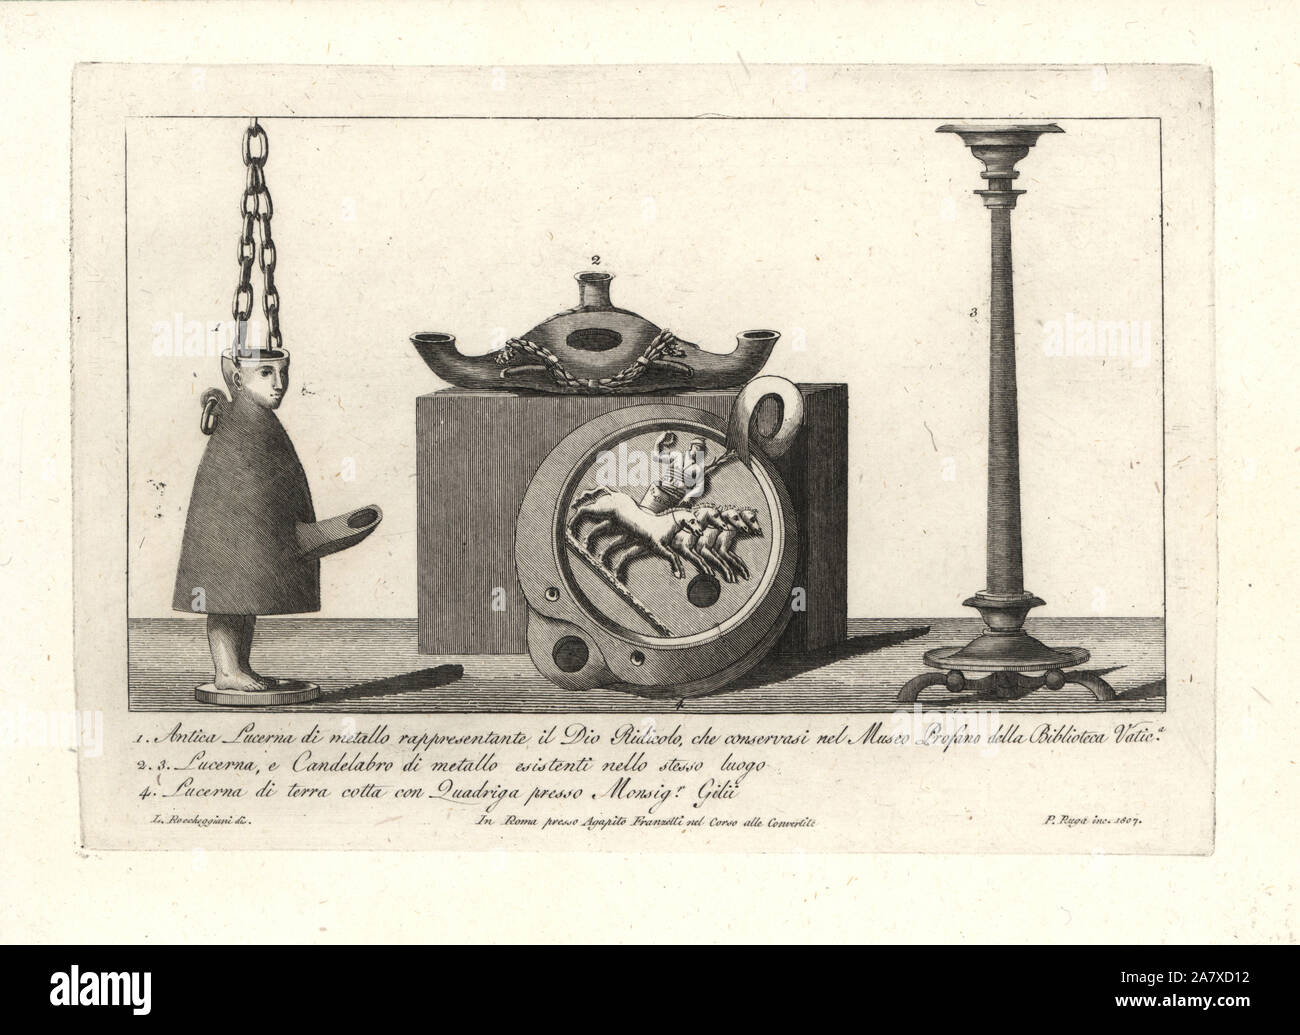 Ancient comical metal lamp representing the god Ridiculo from Library of the Profane in the Vatican Museum, metal lantern 2, metal candleholder 3, and terracotta lantern with four-horse chariot Quadriga 4. Copperplate engraving by Pietro Ruga after an illustration by Lorenzo Rocceggiani from his own 100 Plates of Costumes Religious, Civil and Military of the Ancient Egyptians, Etruscans, Greeks and Romans, Franzetti, Rome, 1802. Stock Photo